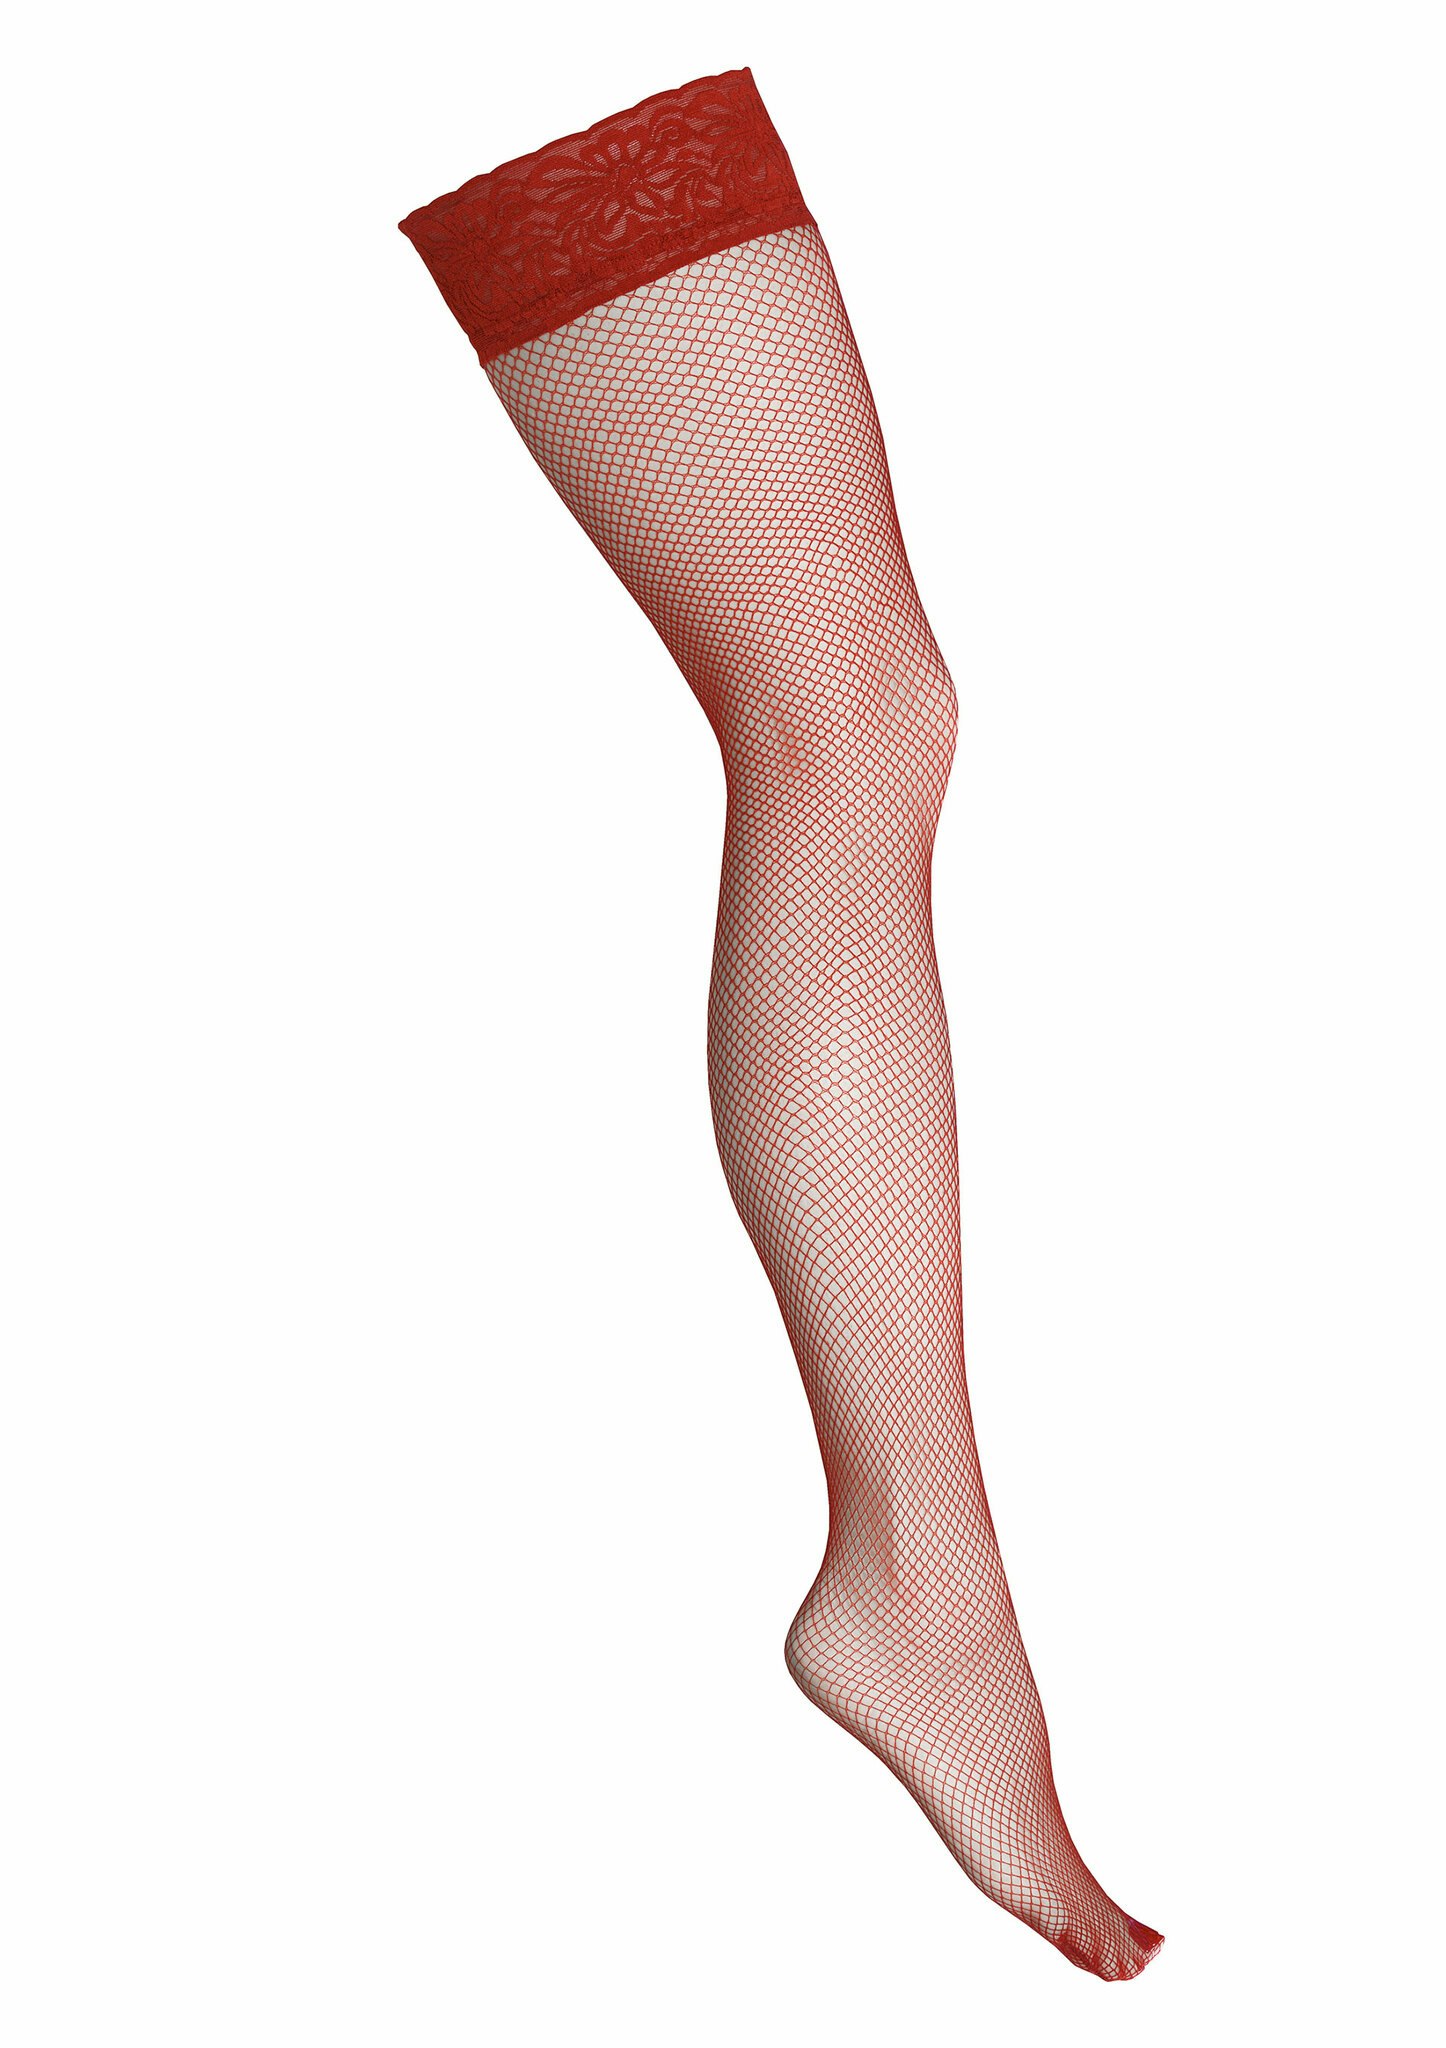 Fishnet hold ups with lace band with silicone, L/XL, Dark red